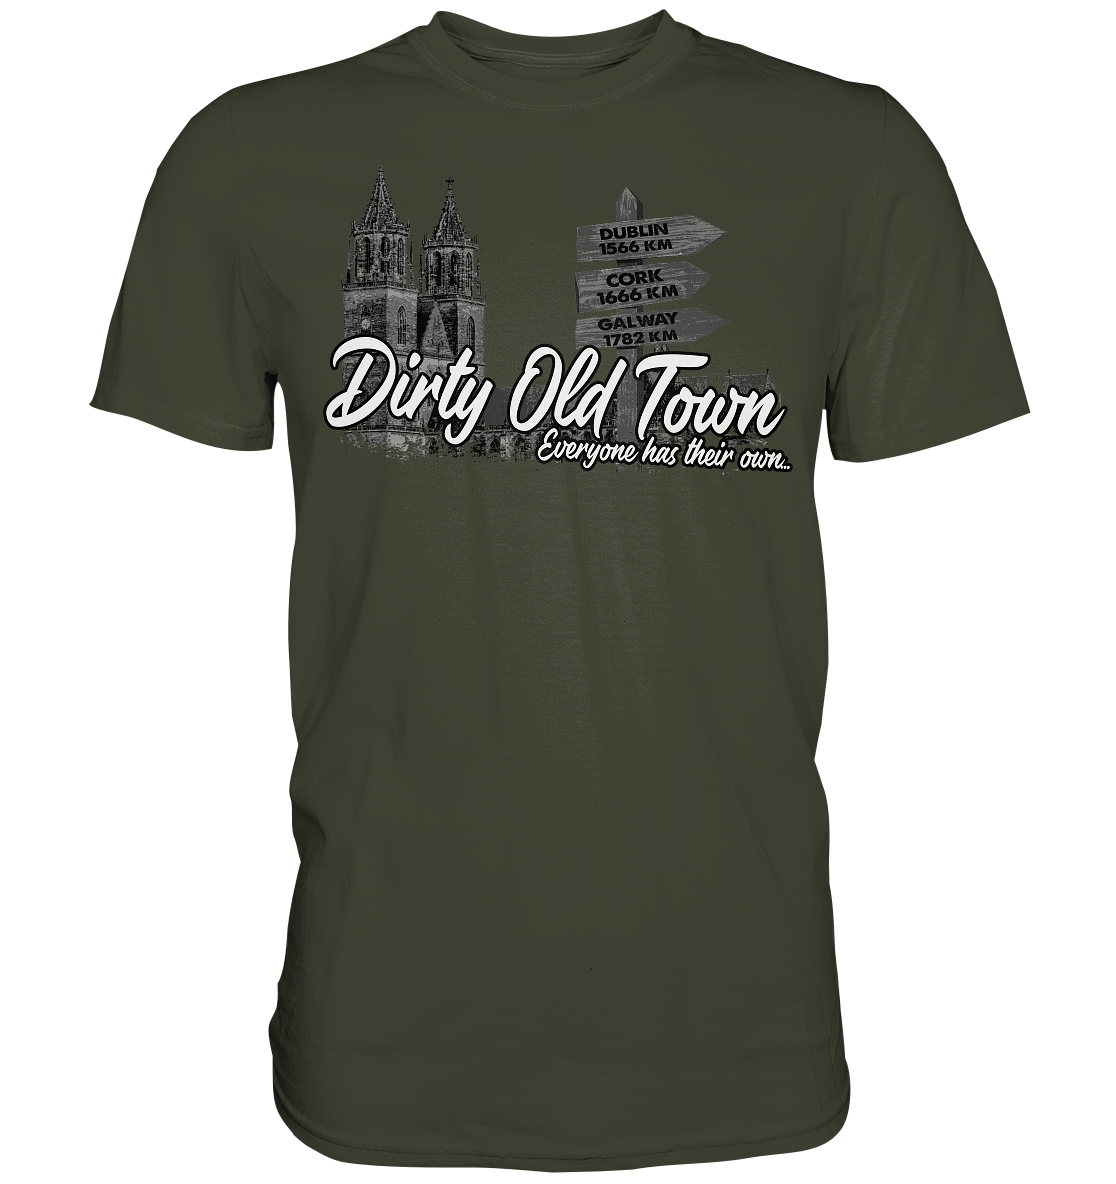 Dirty Old Town "Everyone Has Their Own" (Magdeburg) - Premium Shirt